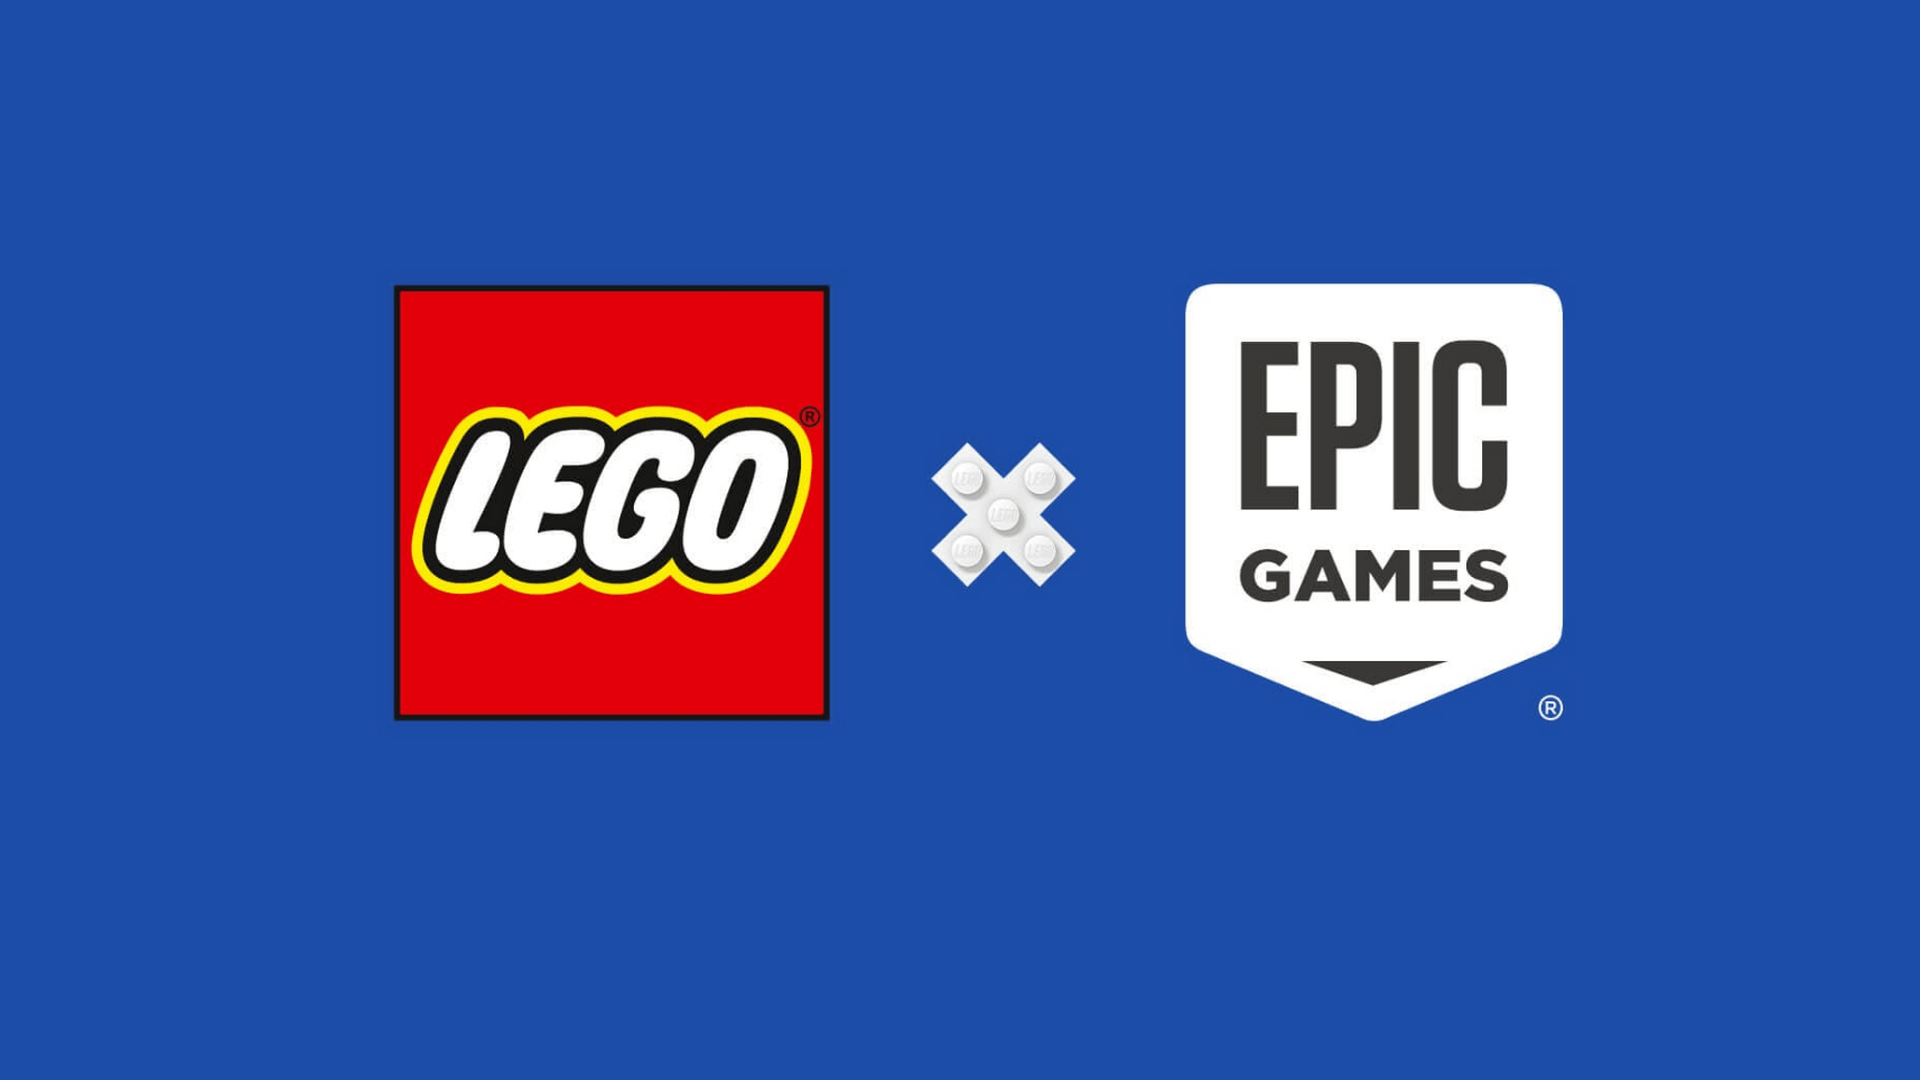 Epic builds on Lego: Metaverse project planned for children with focus on safety